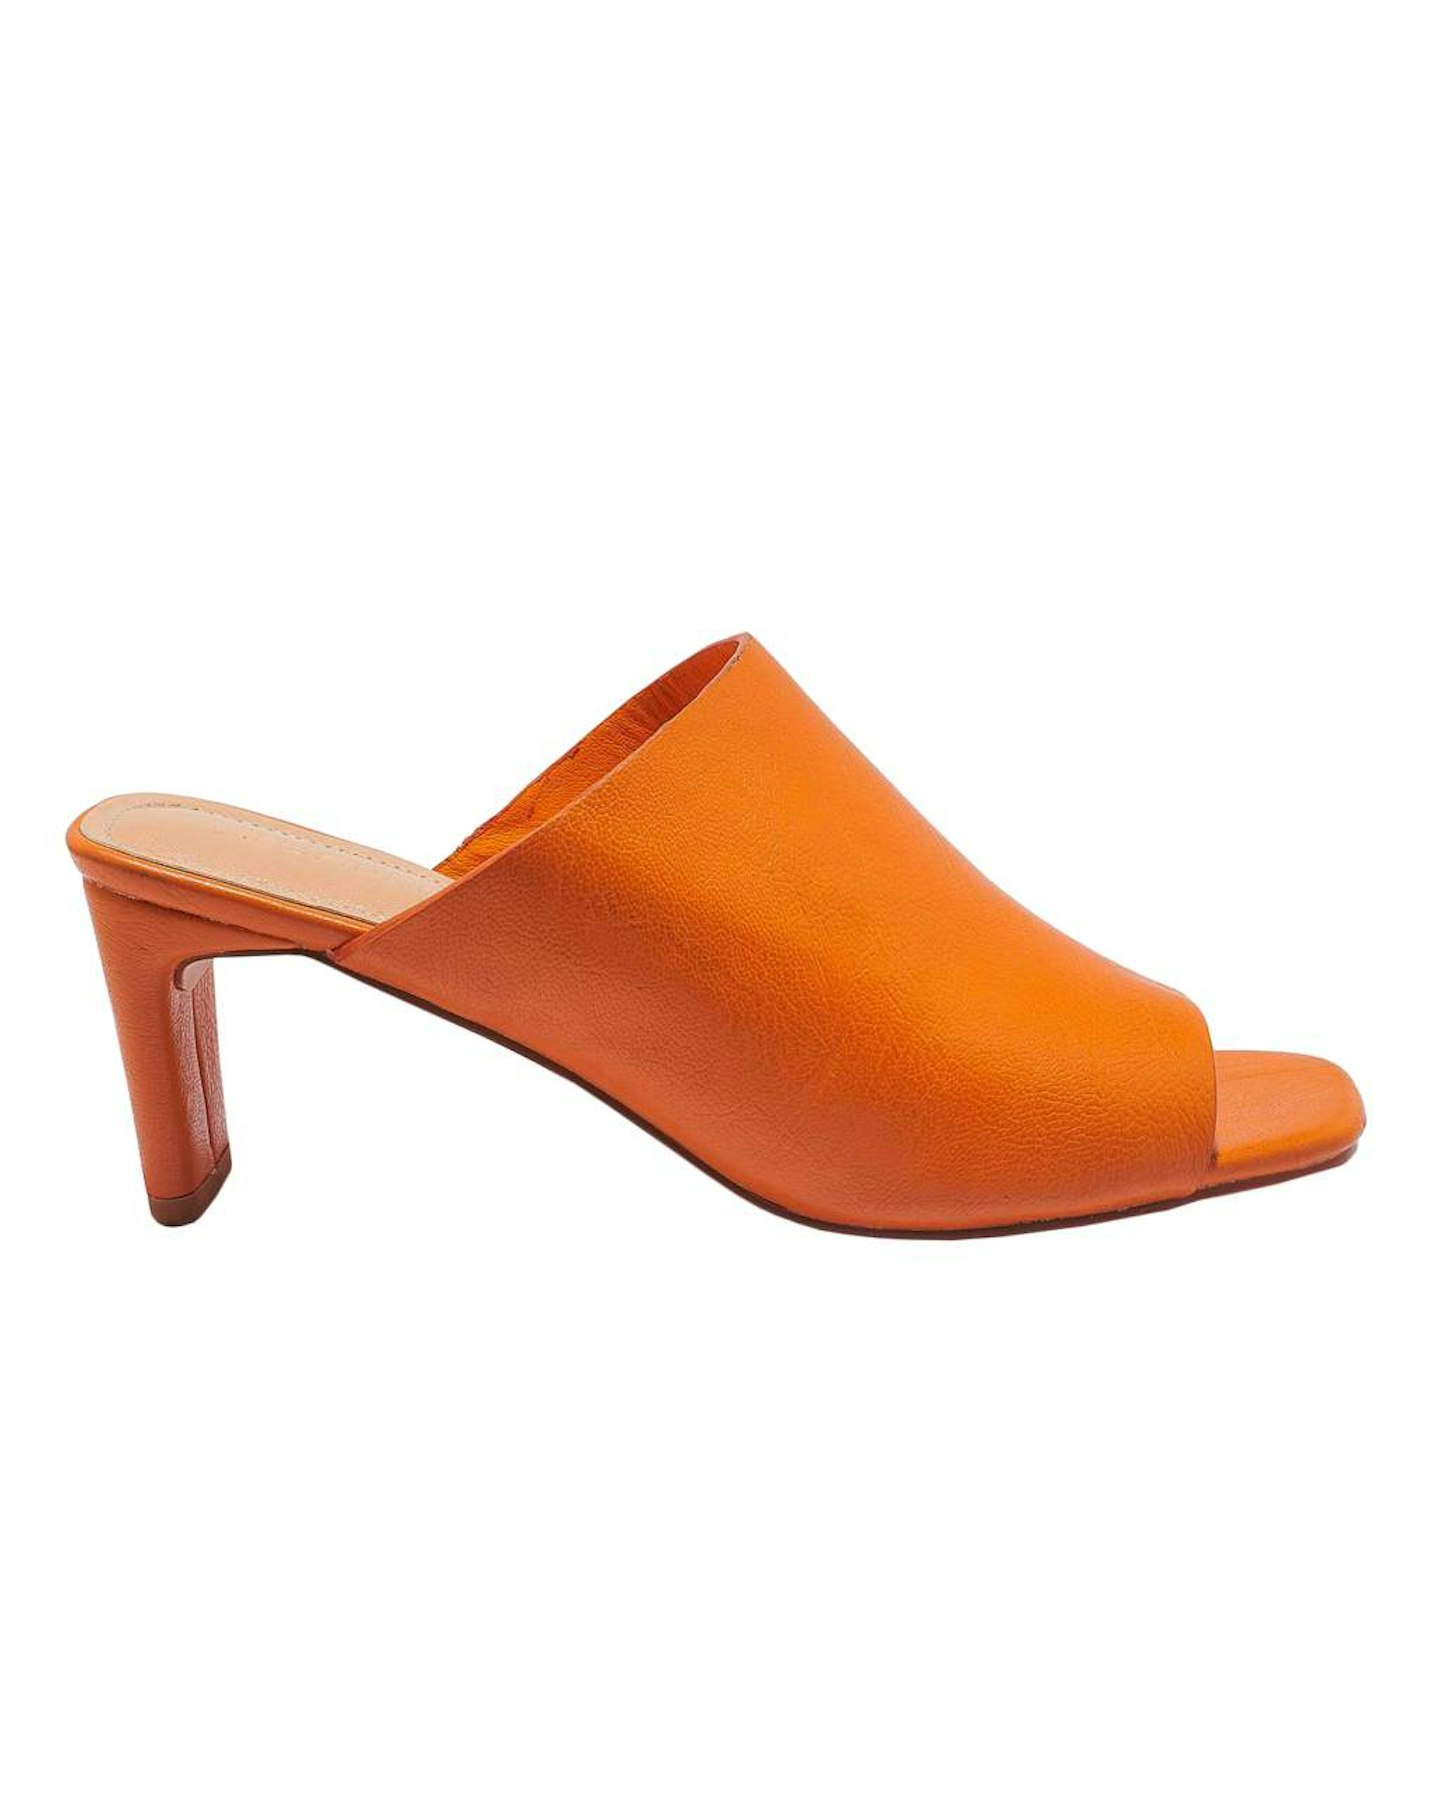 70 Must-Have Items From Our High Street Issue